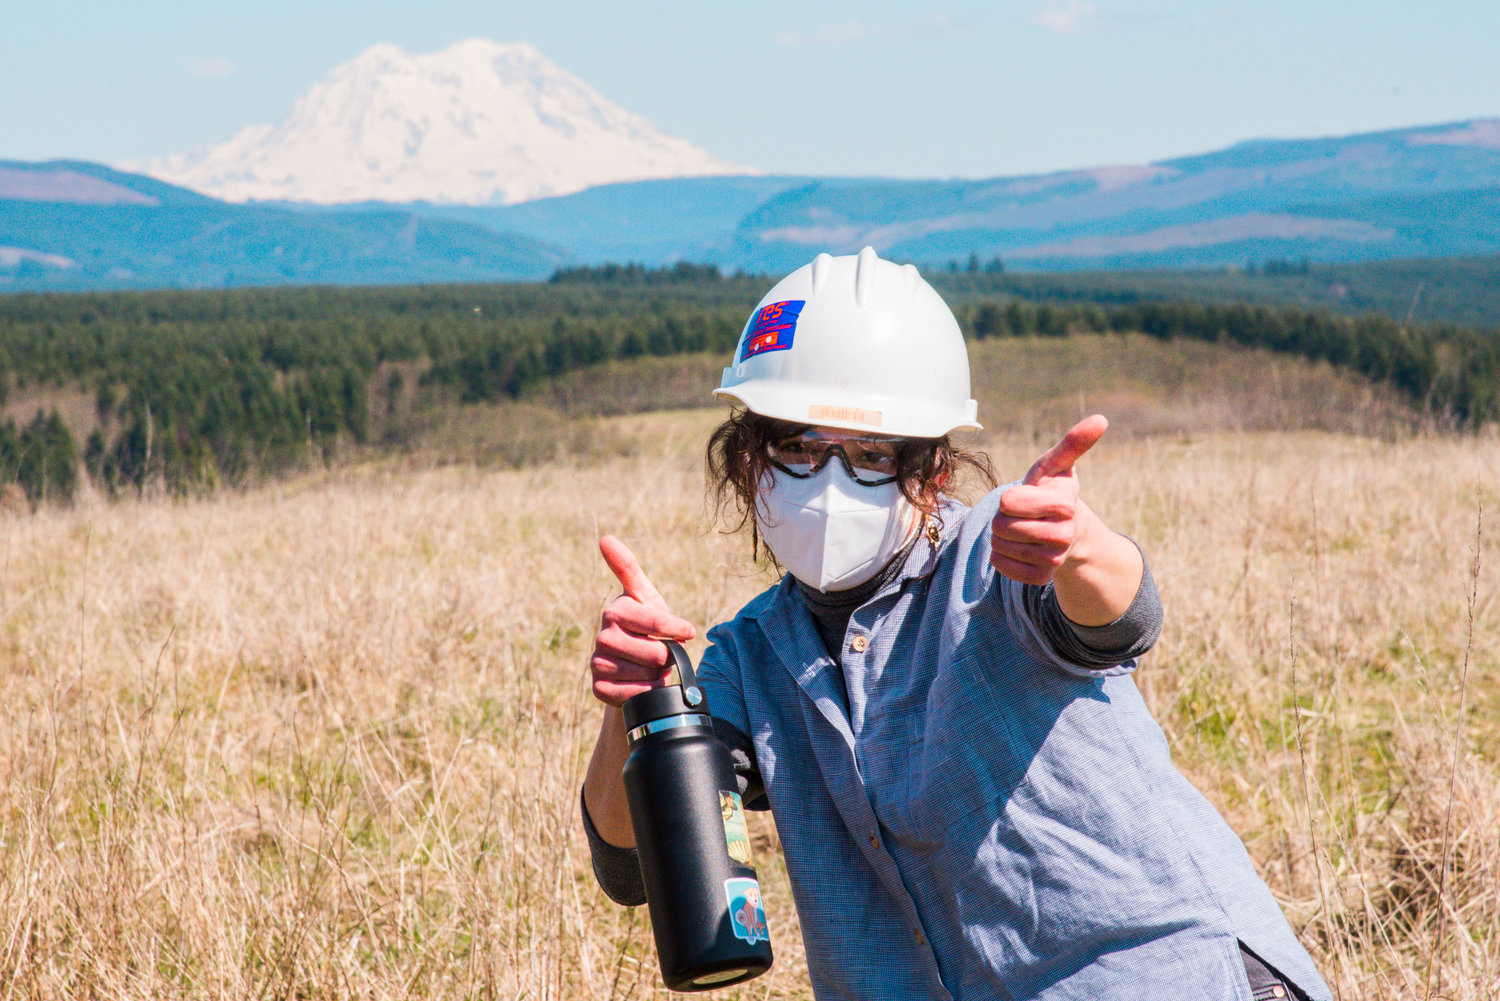 Chronicle reporter Claudia Yaw gives thumbs-up at TransAlta Centralia earlier this month while sporting her personal protective equipment.